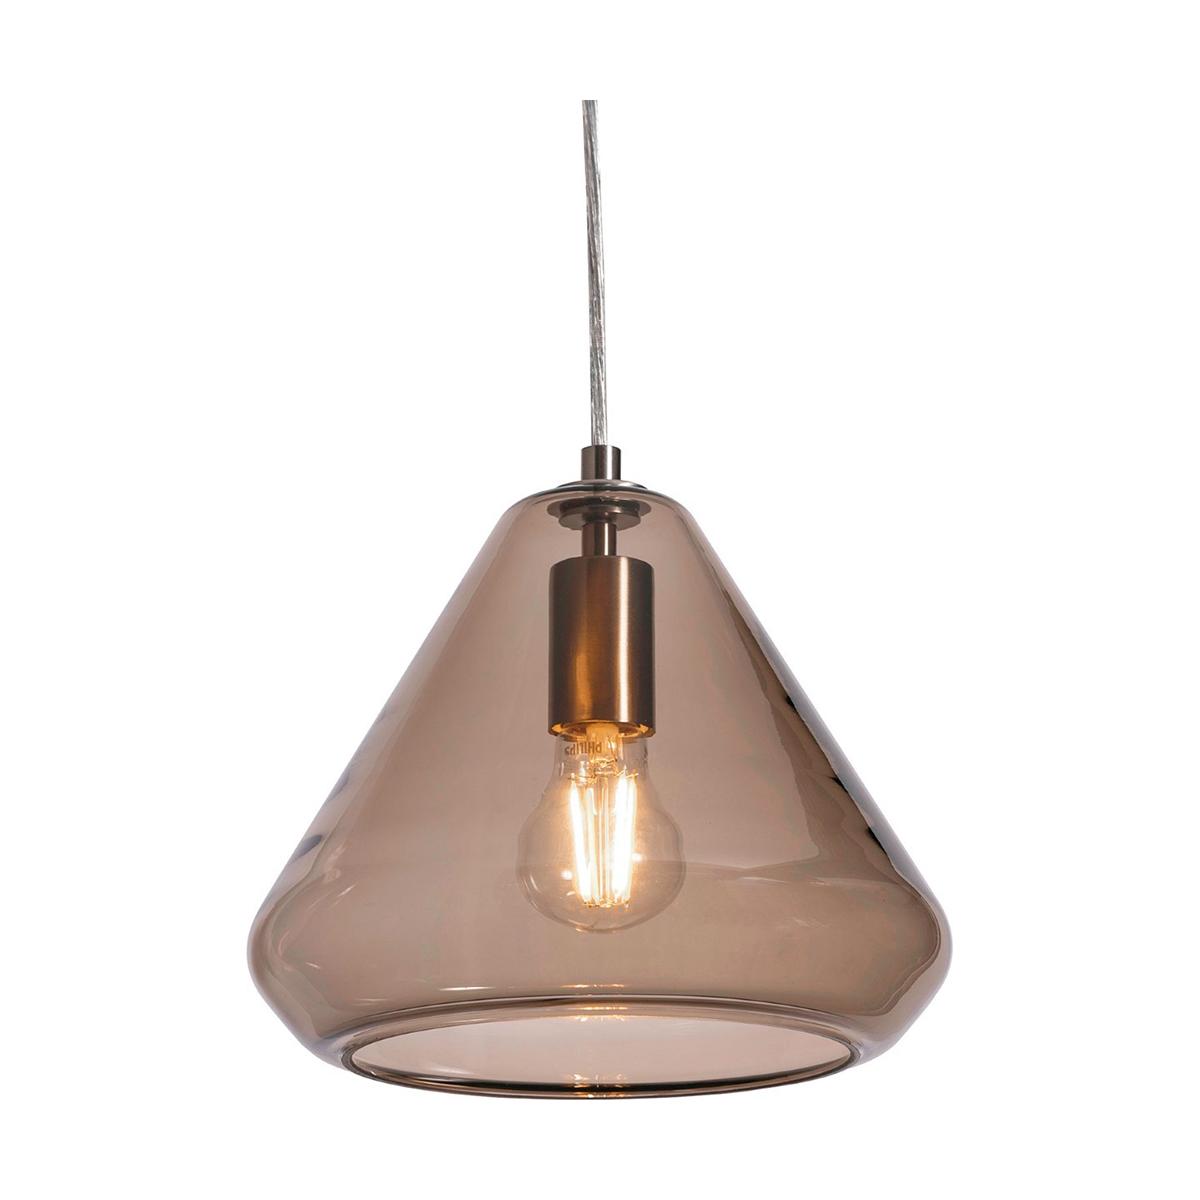 Armitage 10 in. Pendant Light Satin Nickel finish with Brown shade